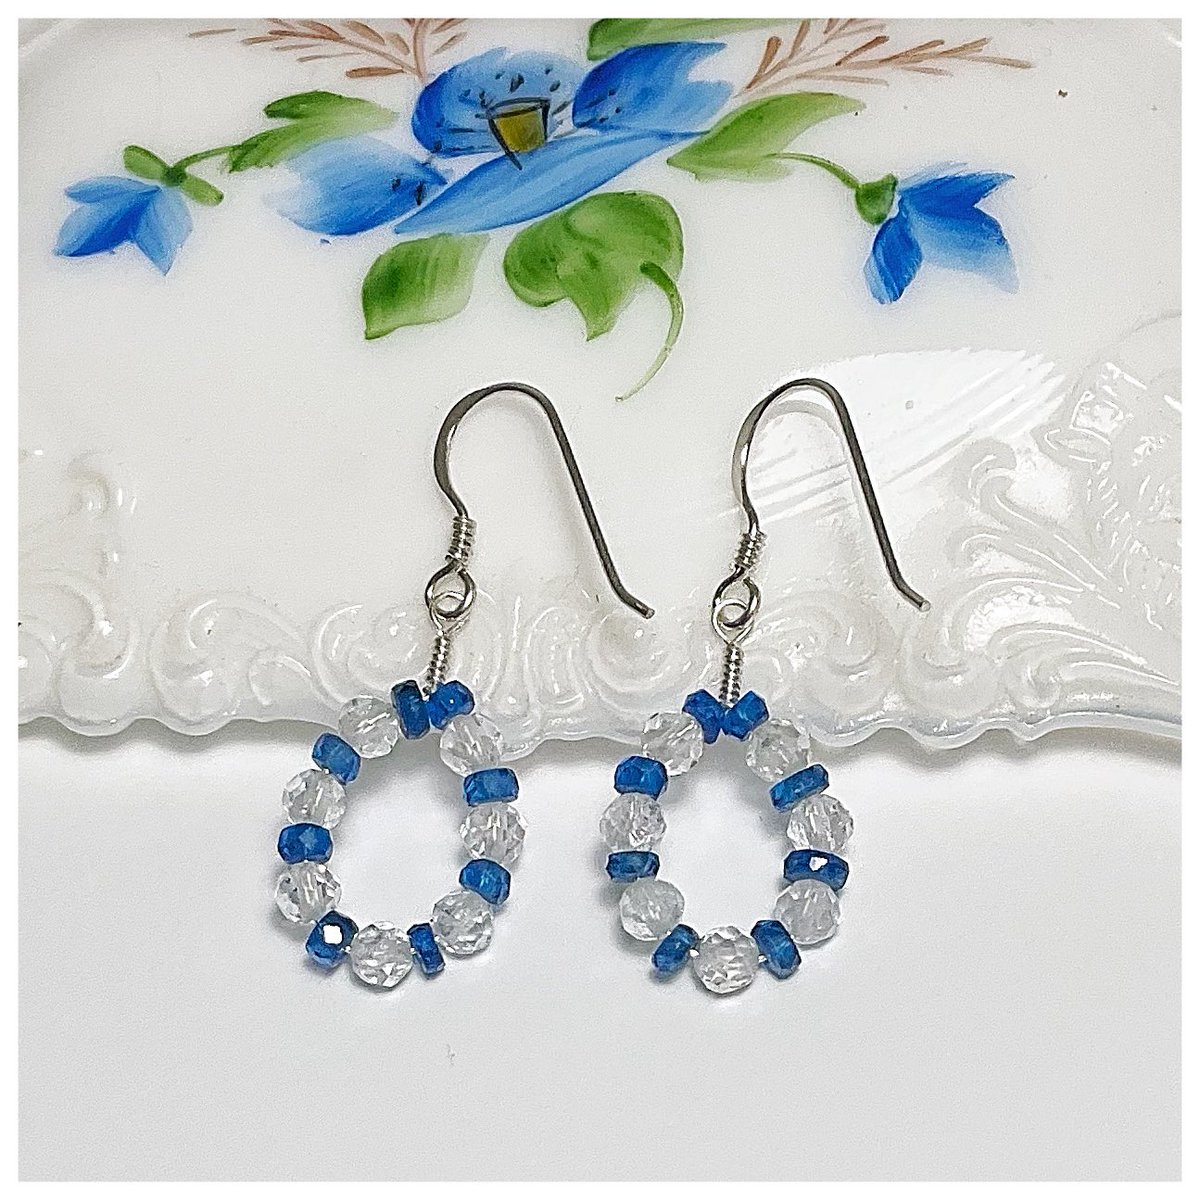 NEW & BLUE 💙
Blue Spinel and White Topaz Sterling Silver Earrings 
Price: $50.00 a pair plus shipping

Sterling Silver, Blue Spinel & White Topaz pendant necklace can also be purchased for $75.00 plus shipping 

#bluespinel #whitetopaz #sterlingsilver #earrings #necklace